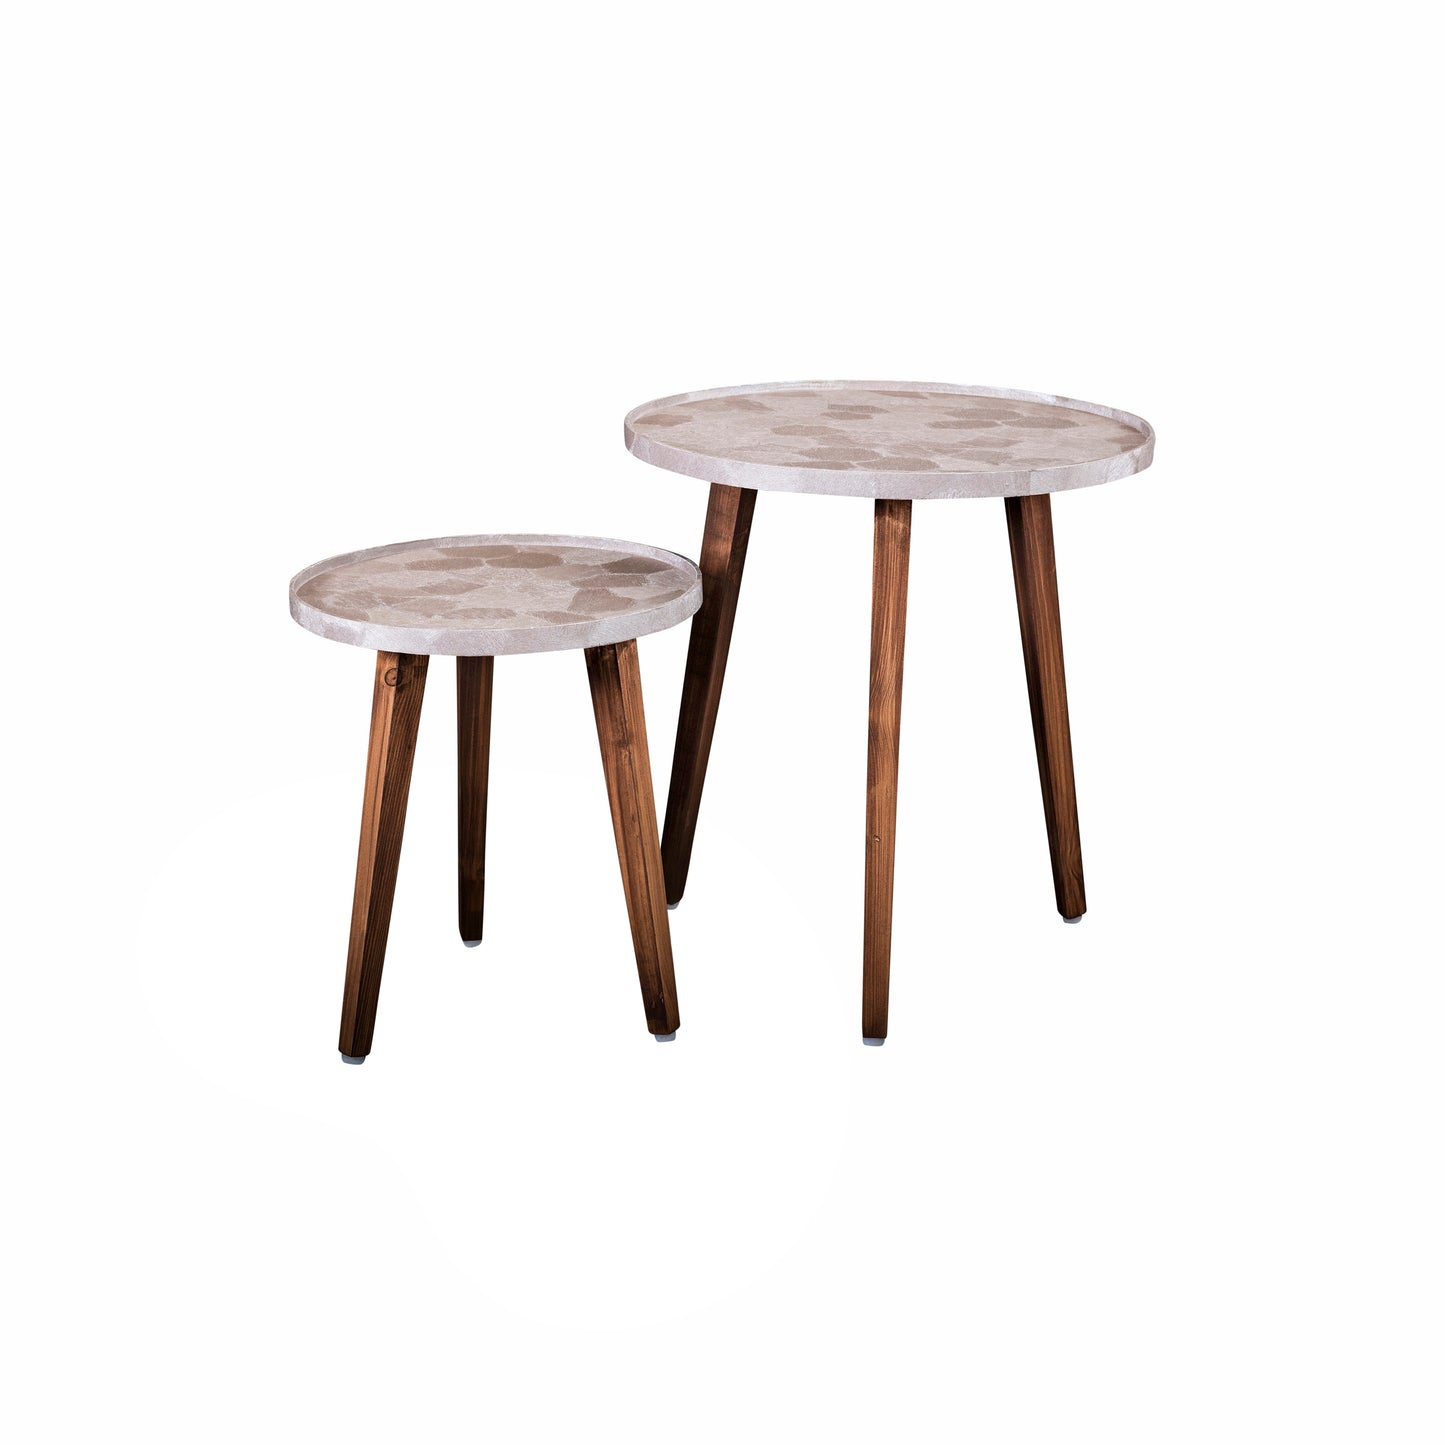 A Tiny Mistake Allure Rose Gold Wooden Nesting Tables (Set of 2), Living Room Decor